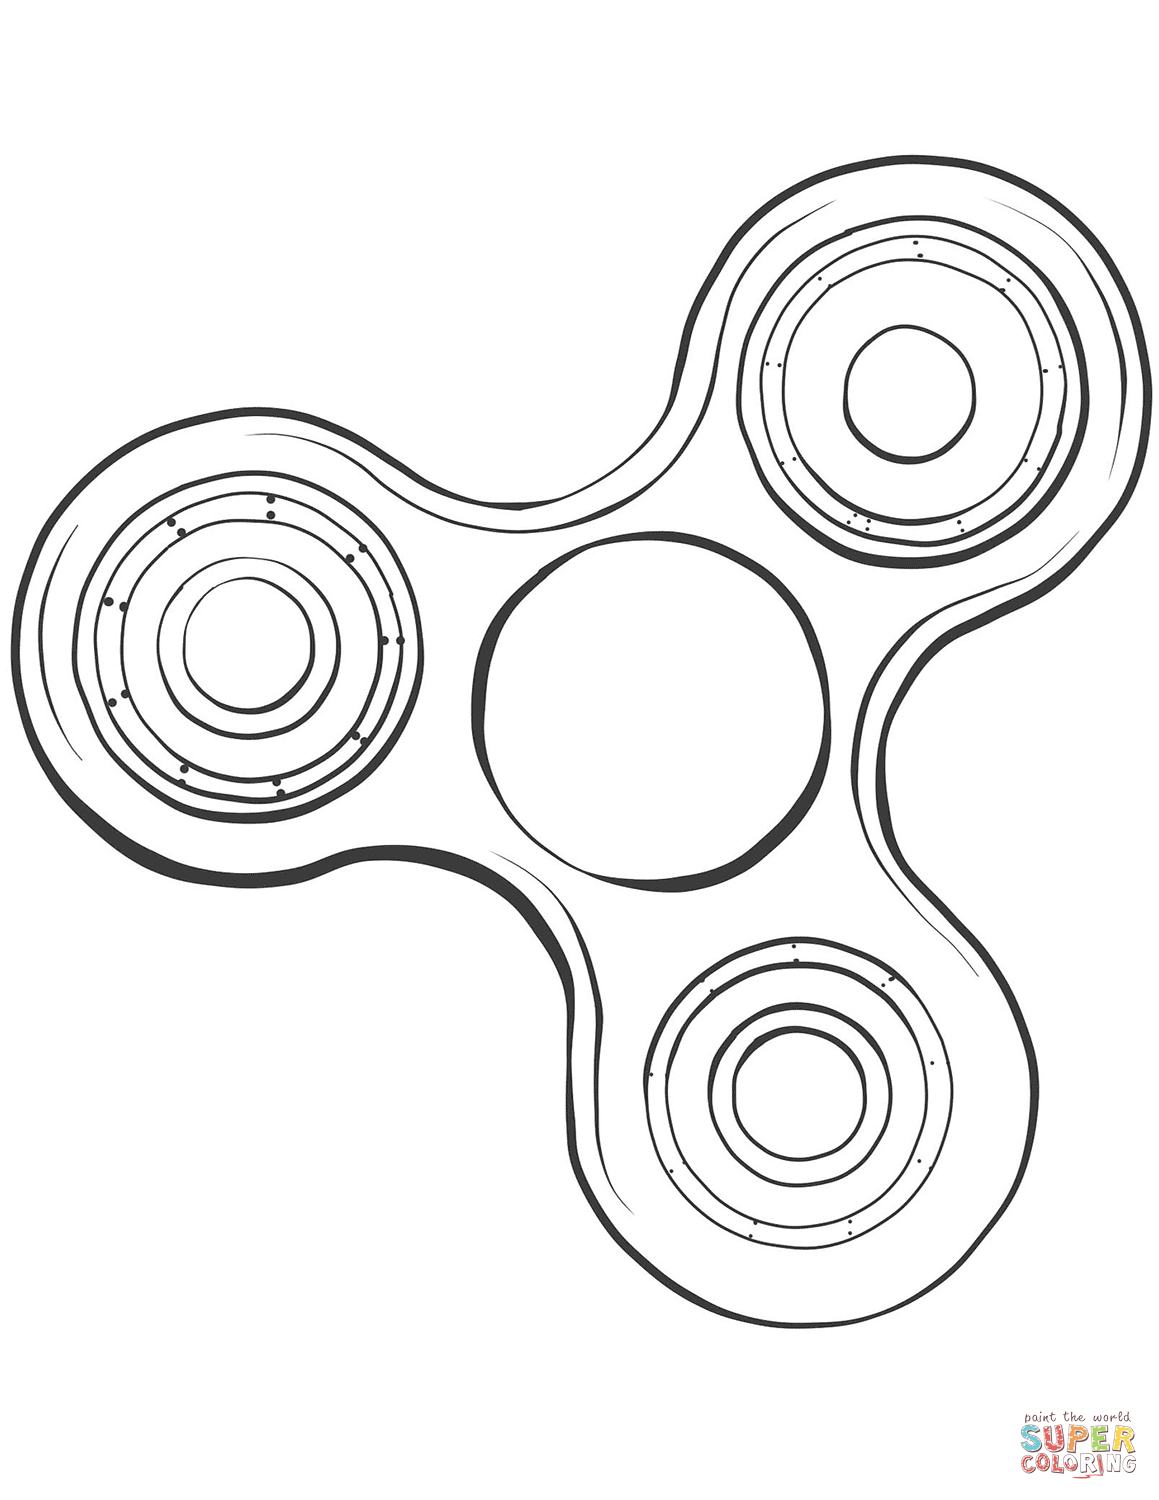 Coloring Pages Of Fidget Spinners Fidget Spinner Coloring Page Free Printable Coloring Pages